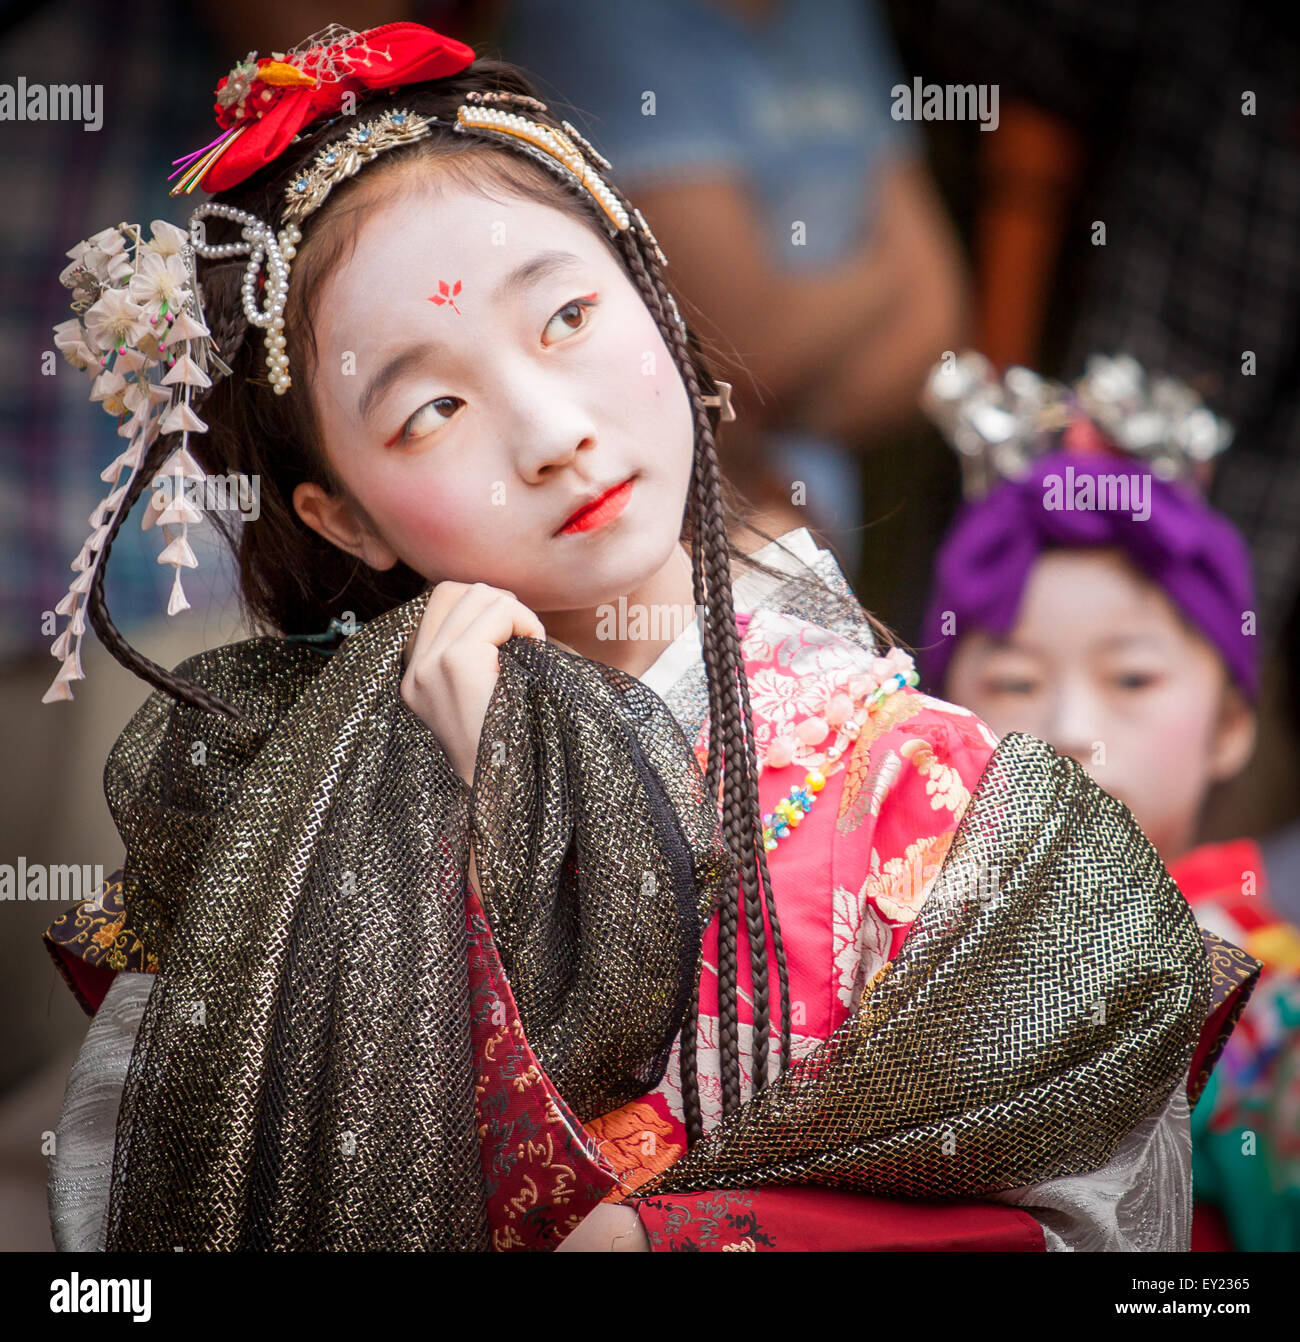 KYOTO, JAPAN - JULY 7: A young dancer in japanese traditional clothing performs  during Tanabata Festival celebrations. Stock Photo